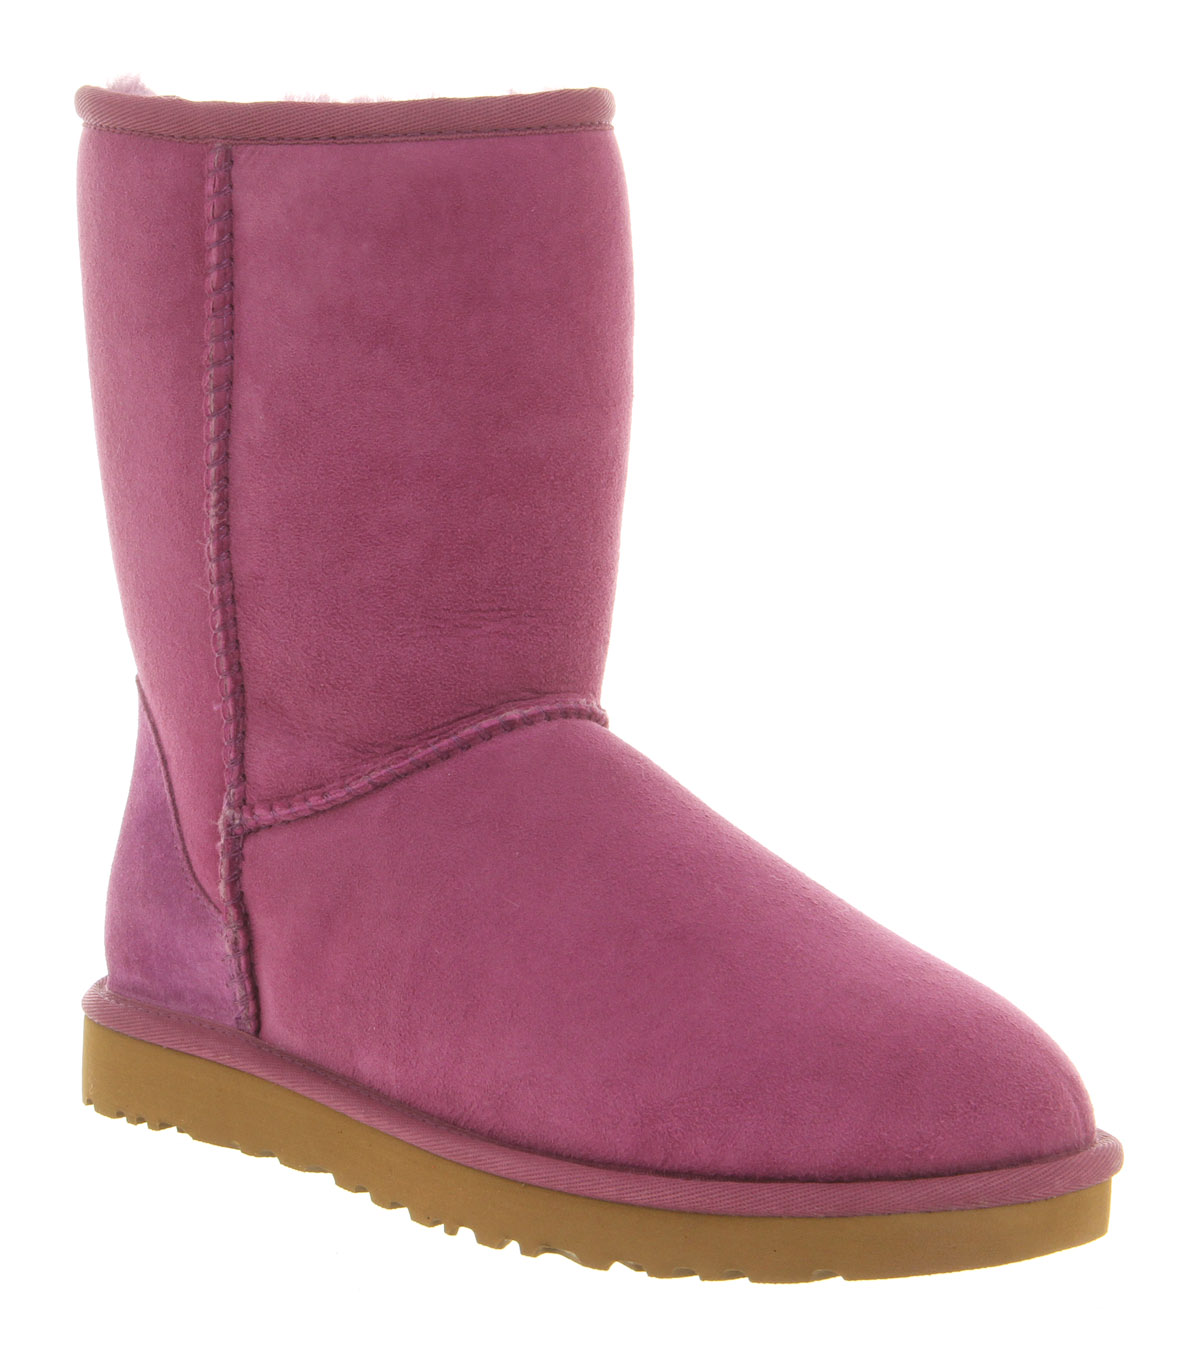 Lyst - UGG Classic Short Boot Lavender Purple Suede in Pink